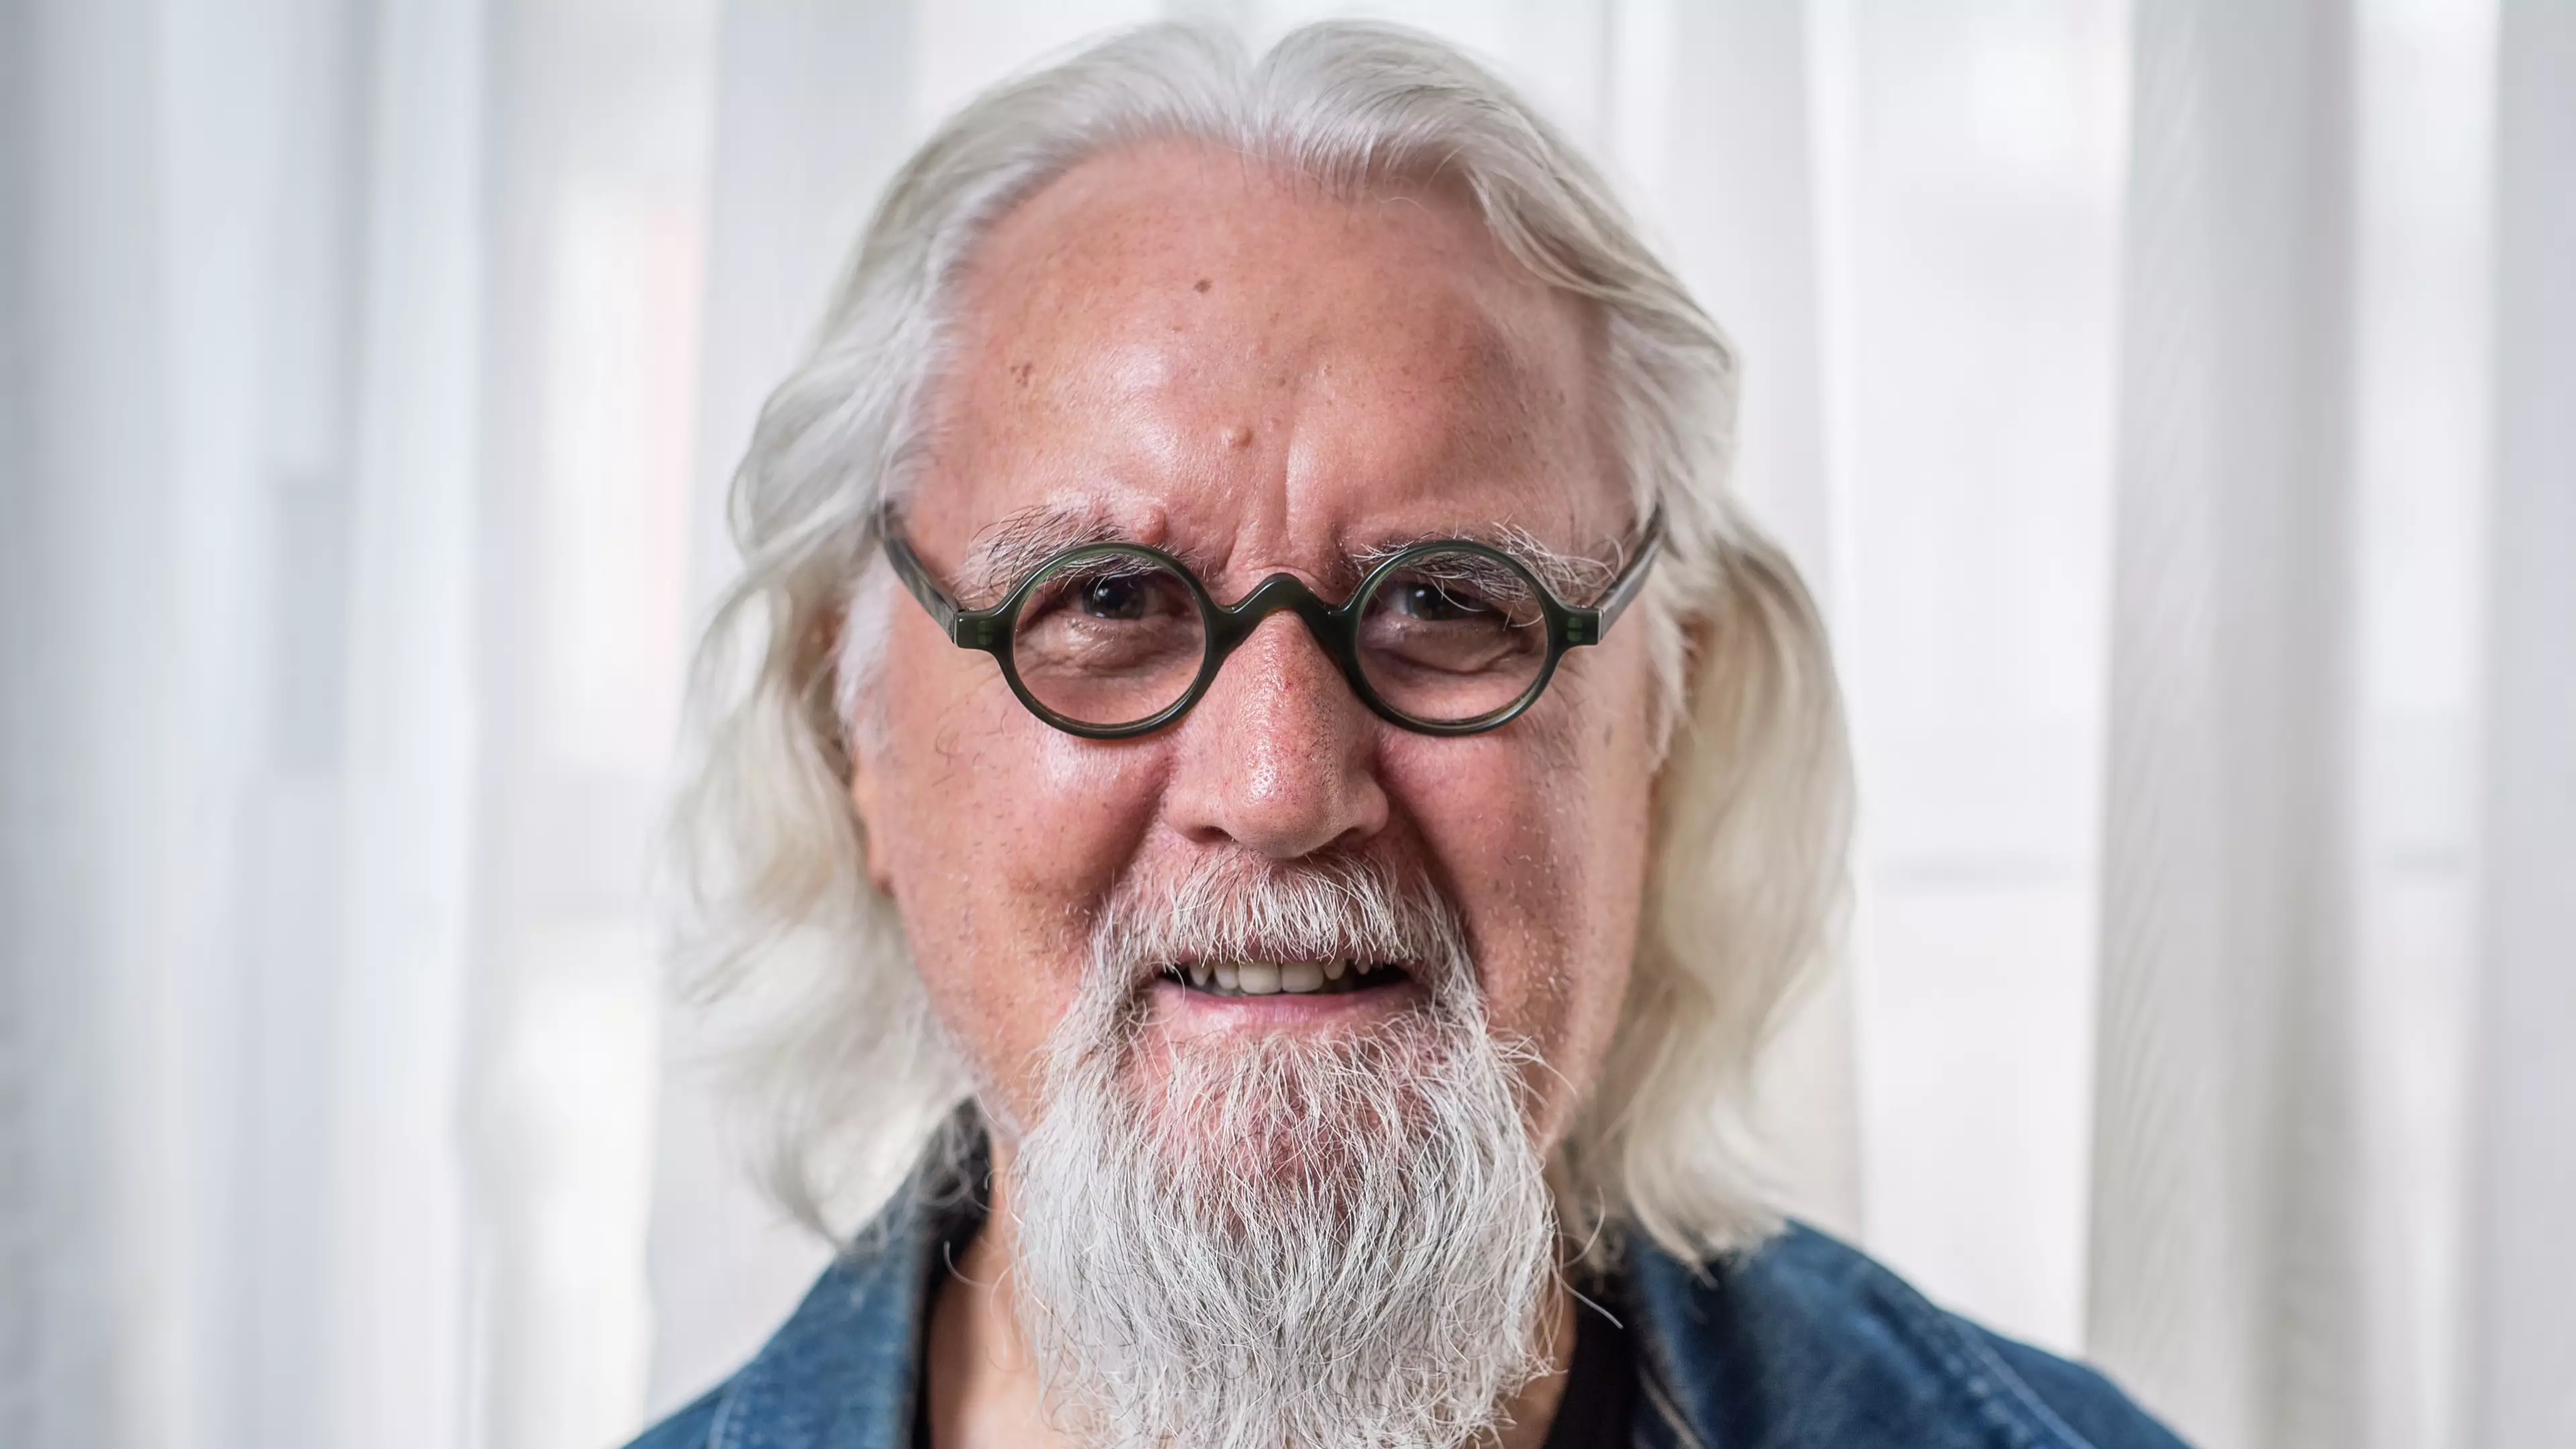 Billy Connolly Admits Parkinson's Disease Will 'End Me' And Tells Fans 'It's Been A Pleasure'